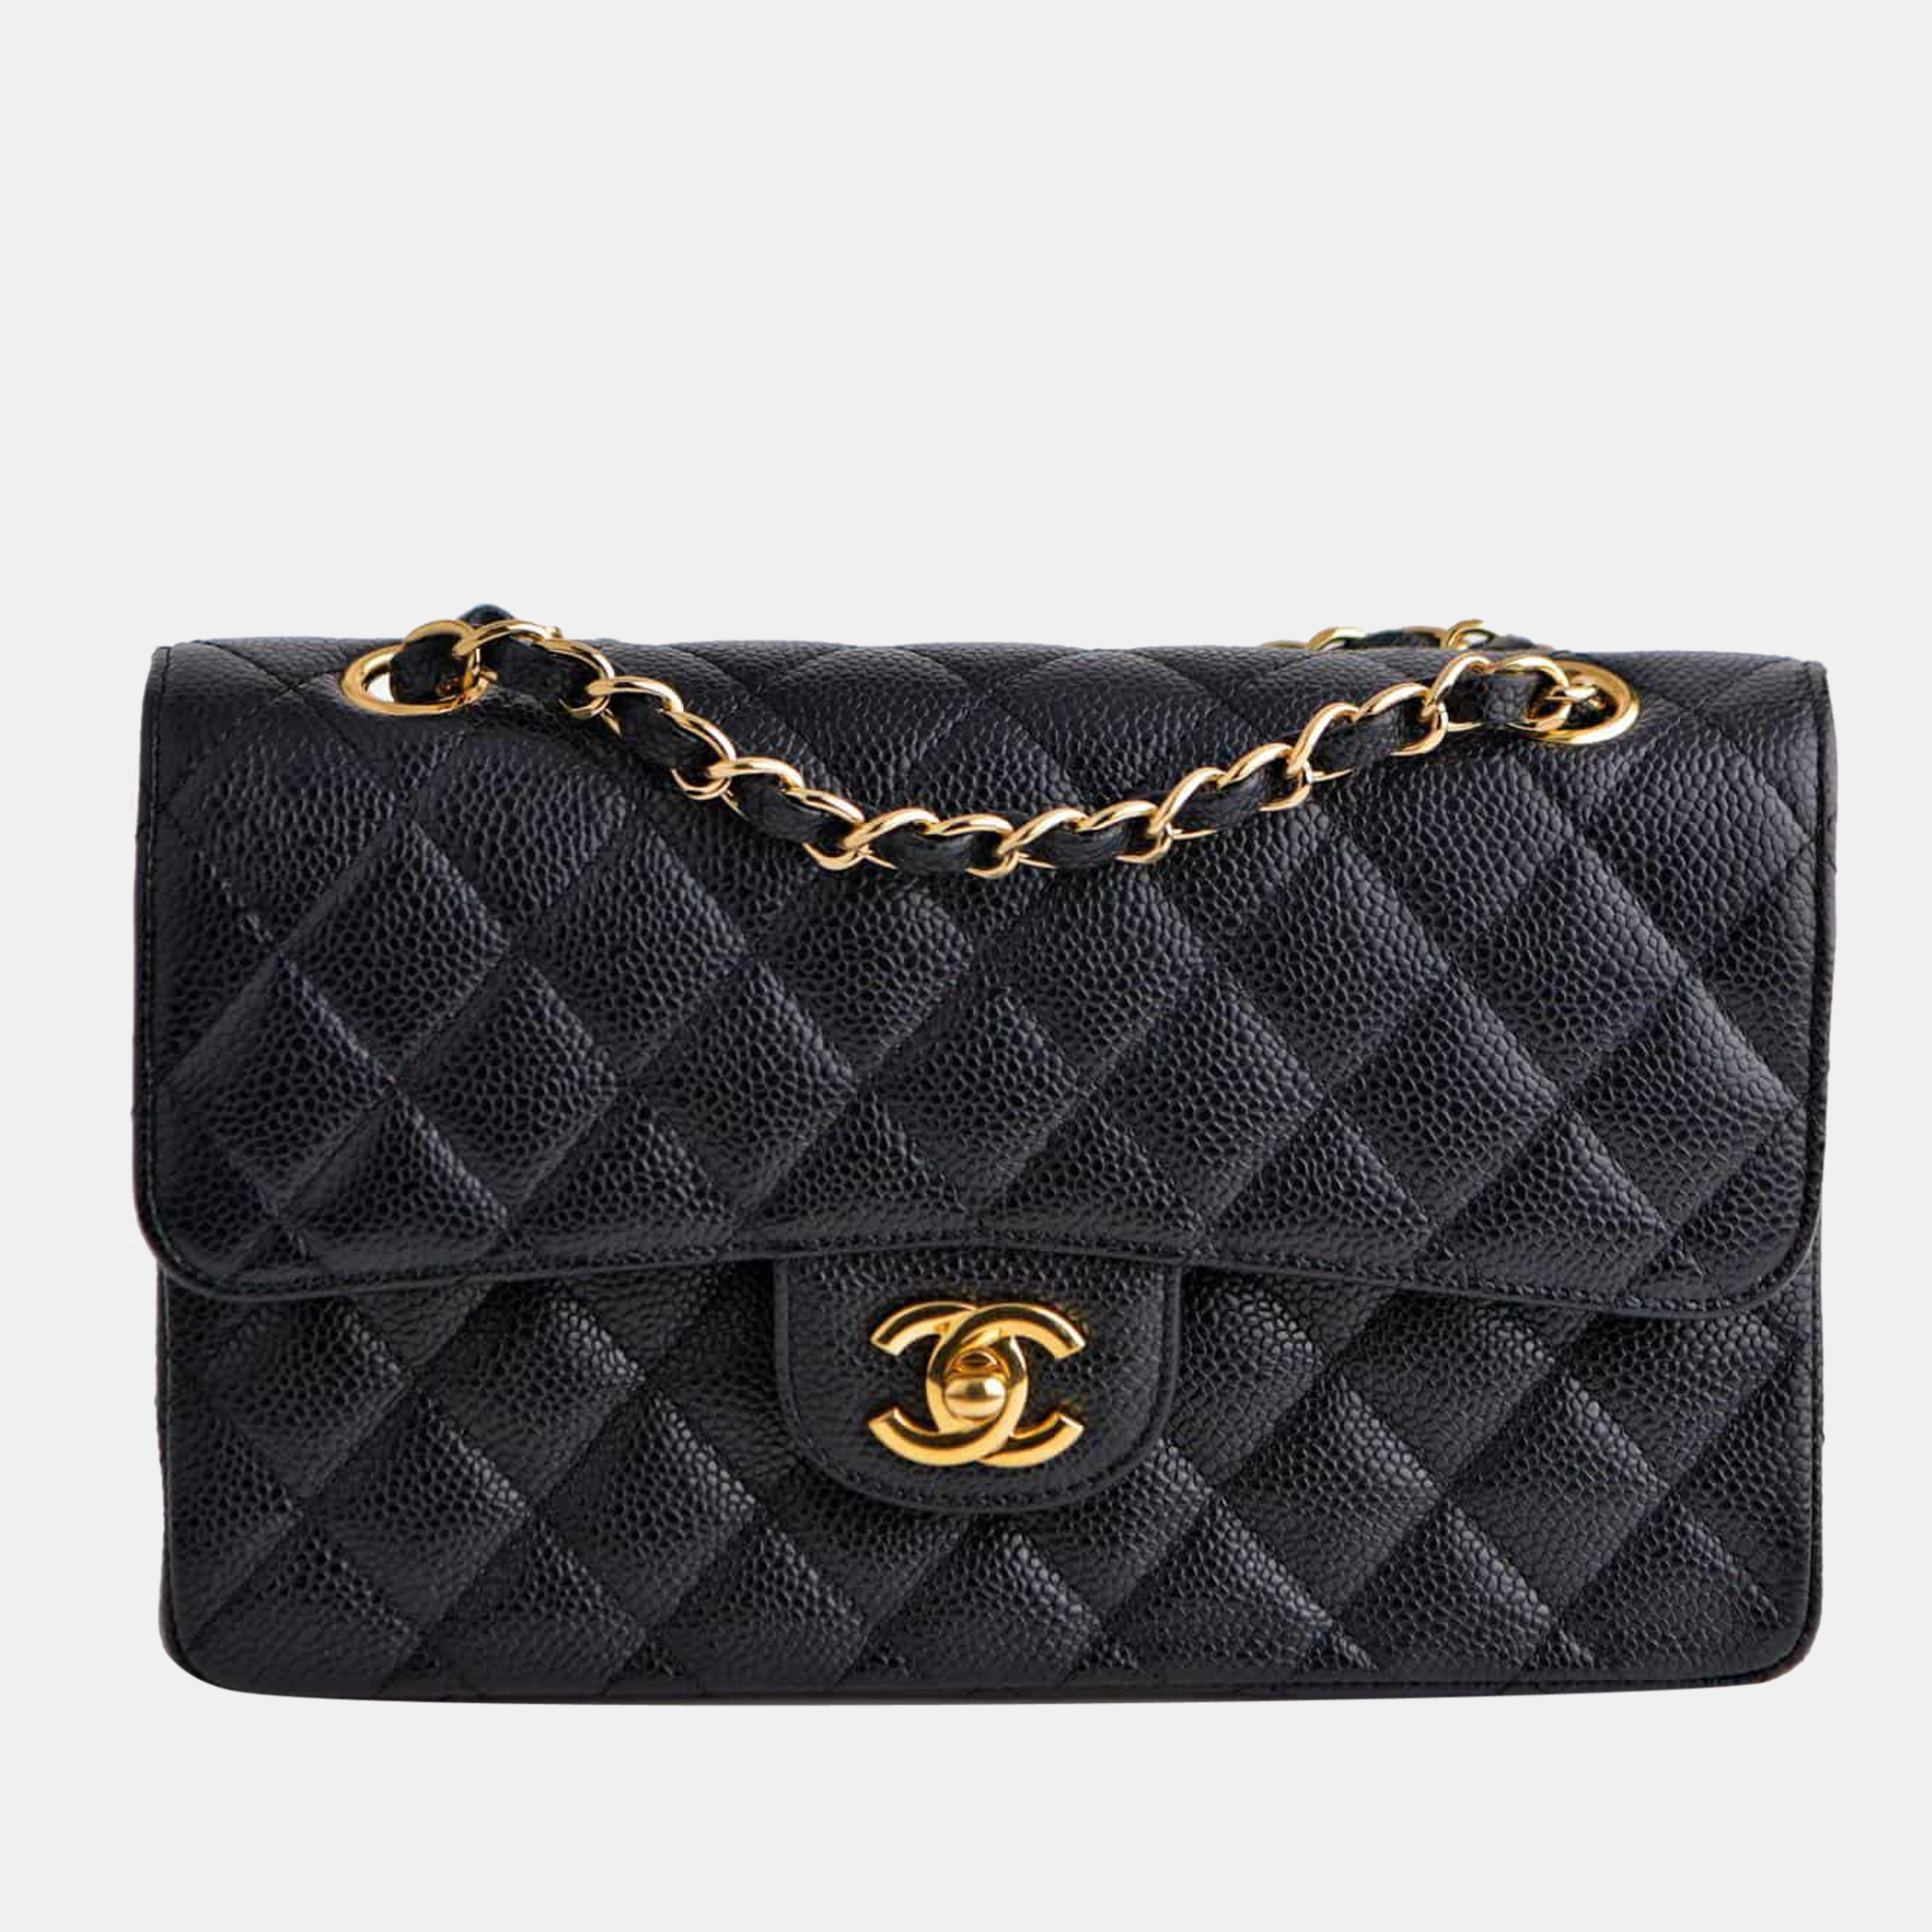 Chanel small double classic flap calfskin ghw bag